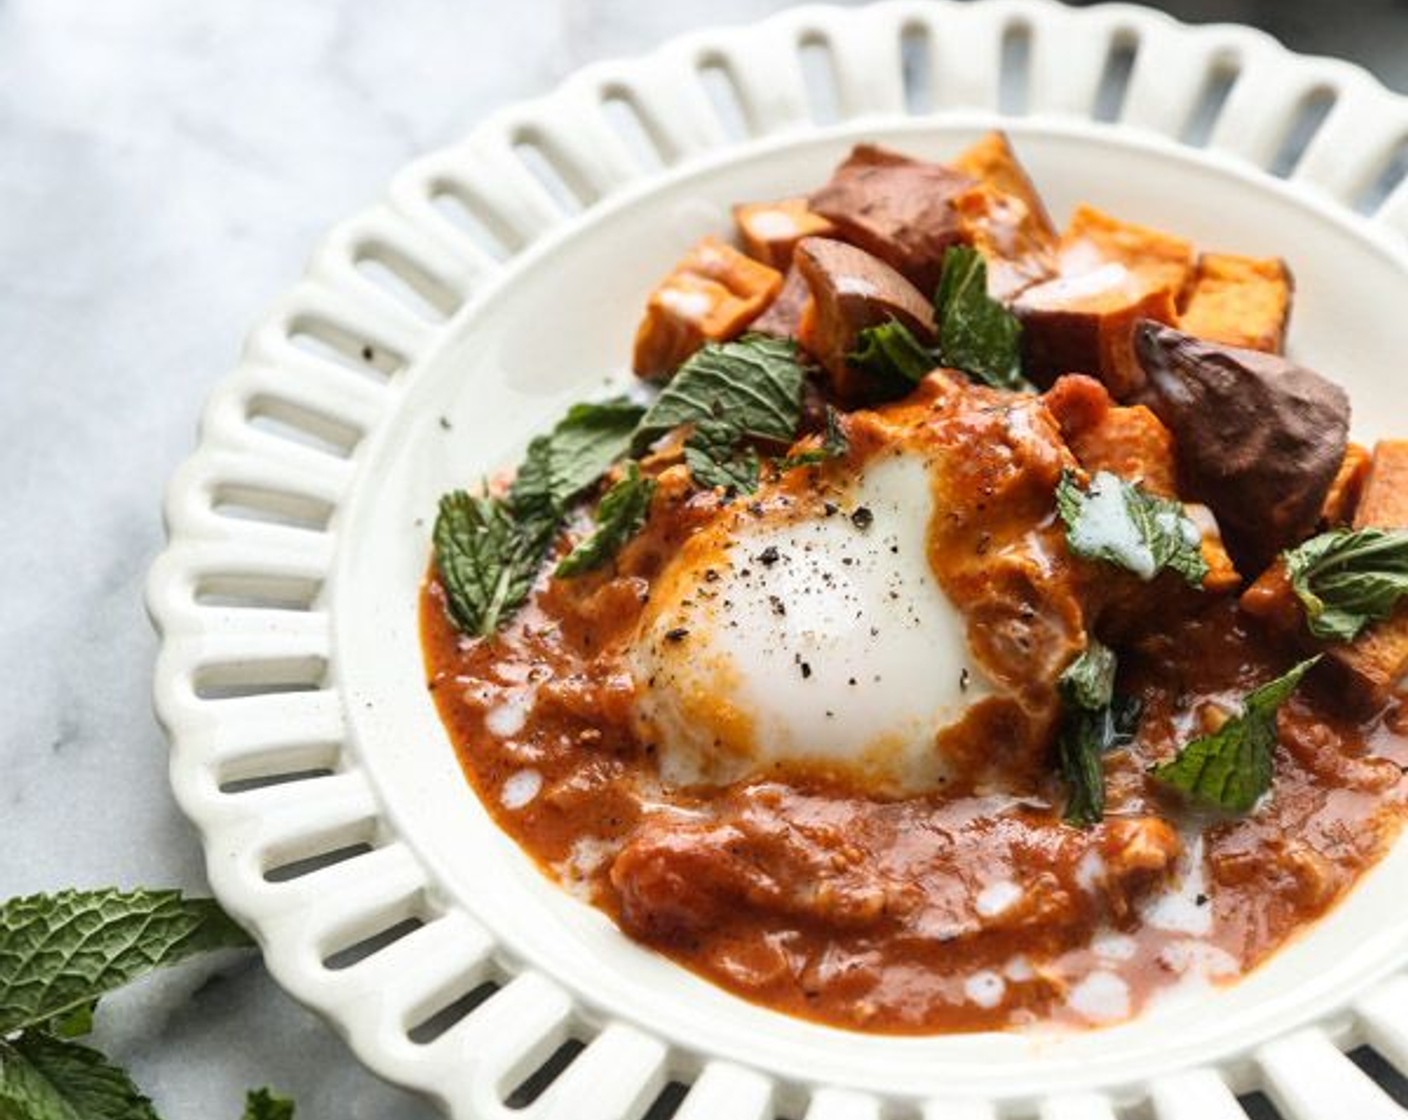 Masala-Style Baked Eggs in Purgatory